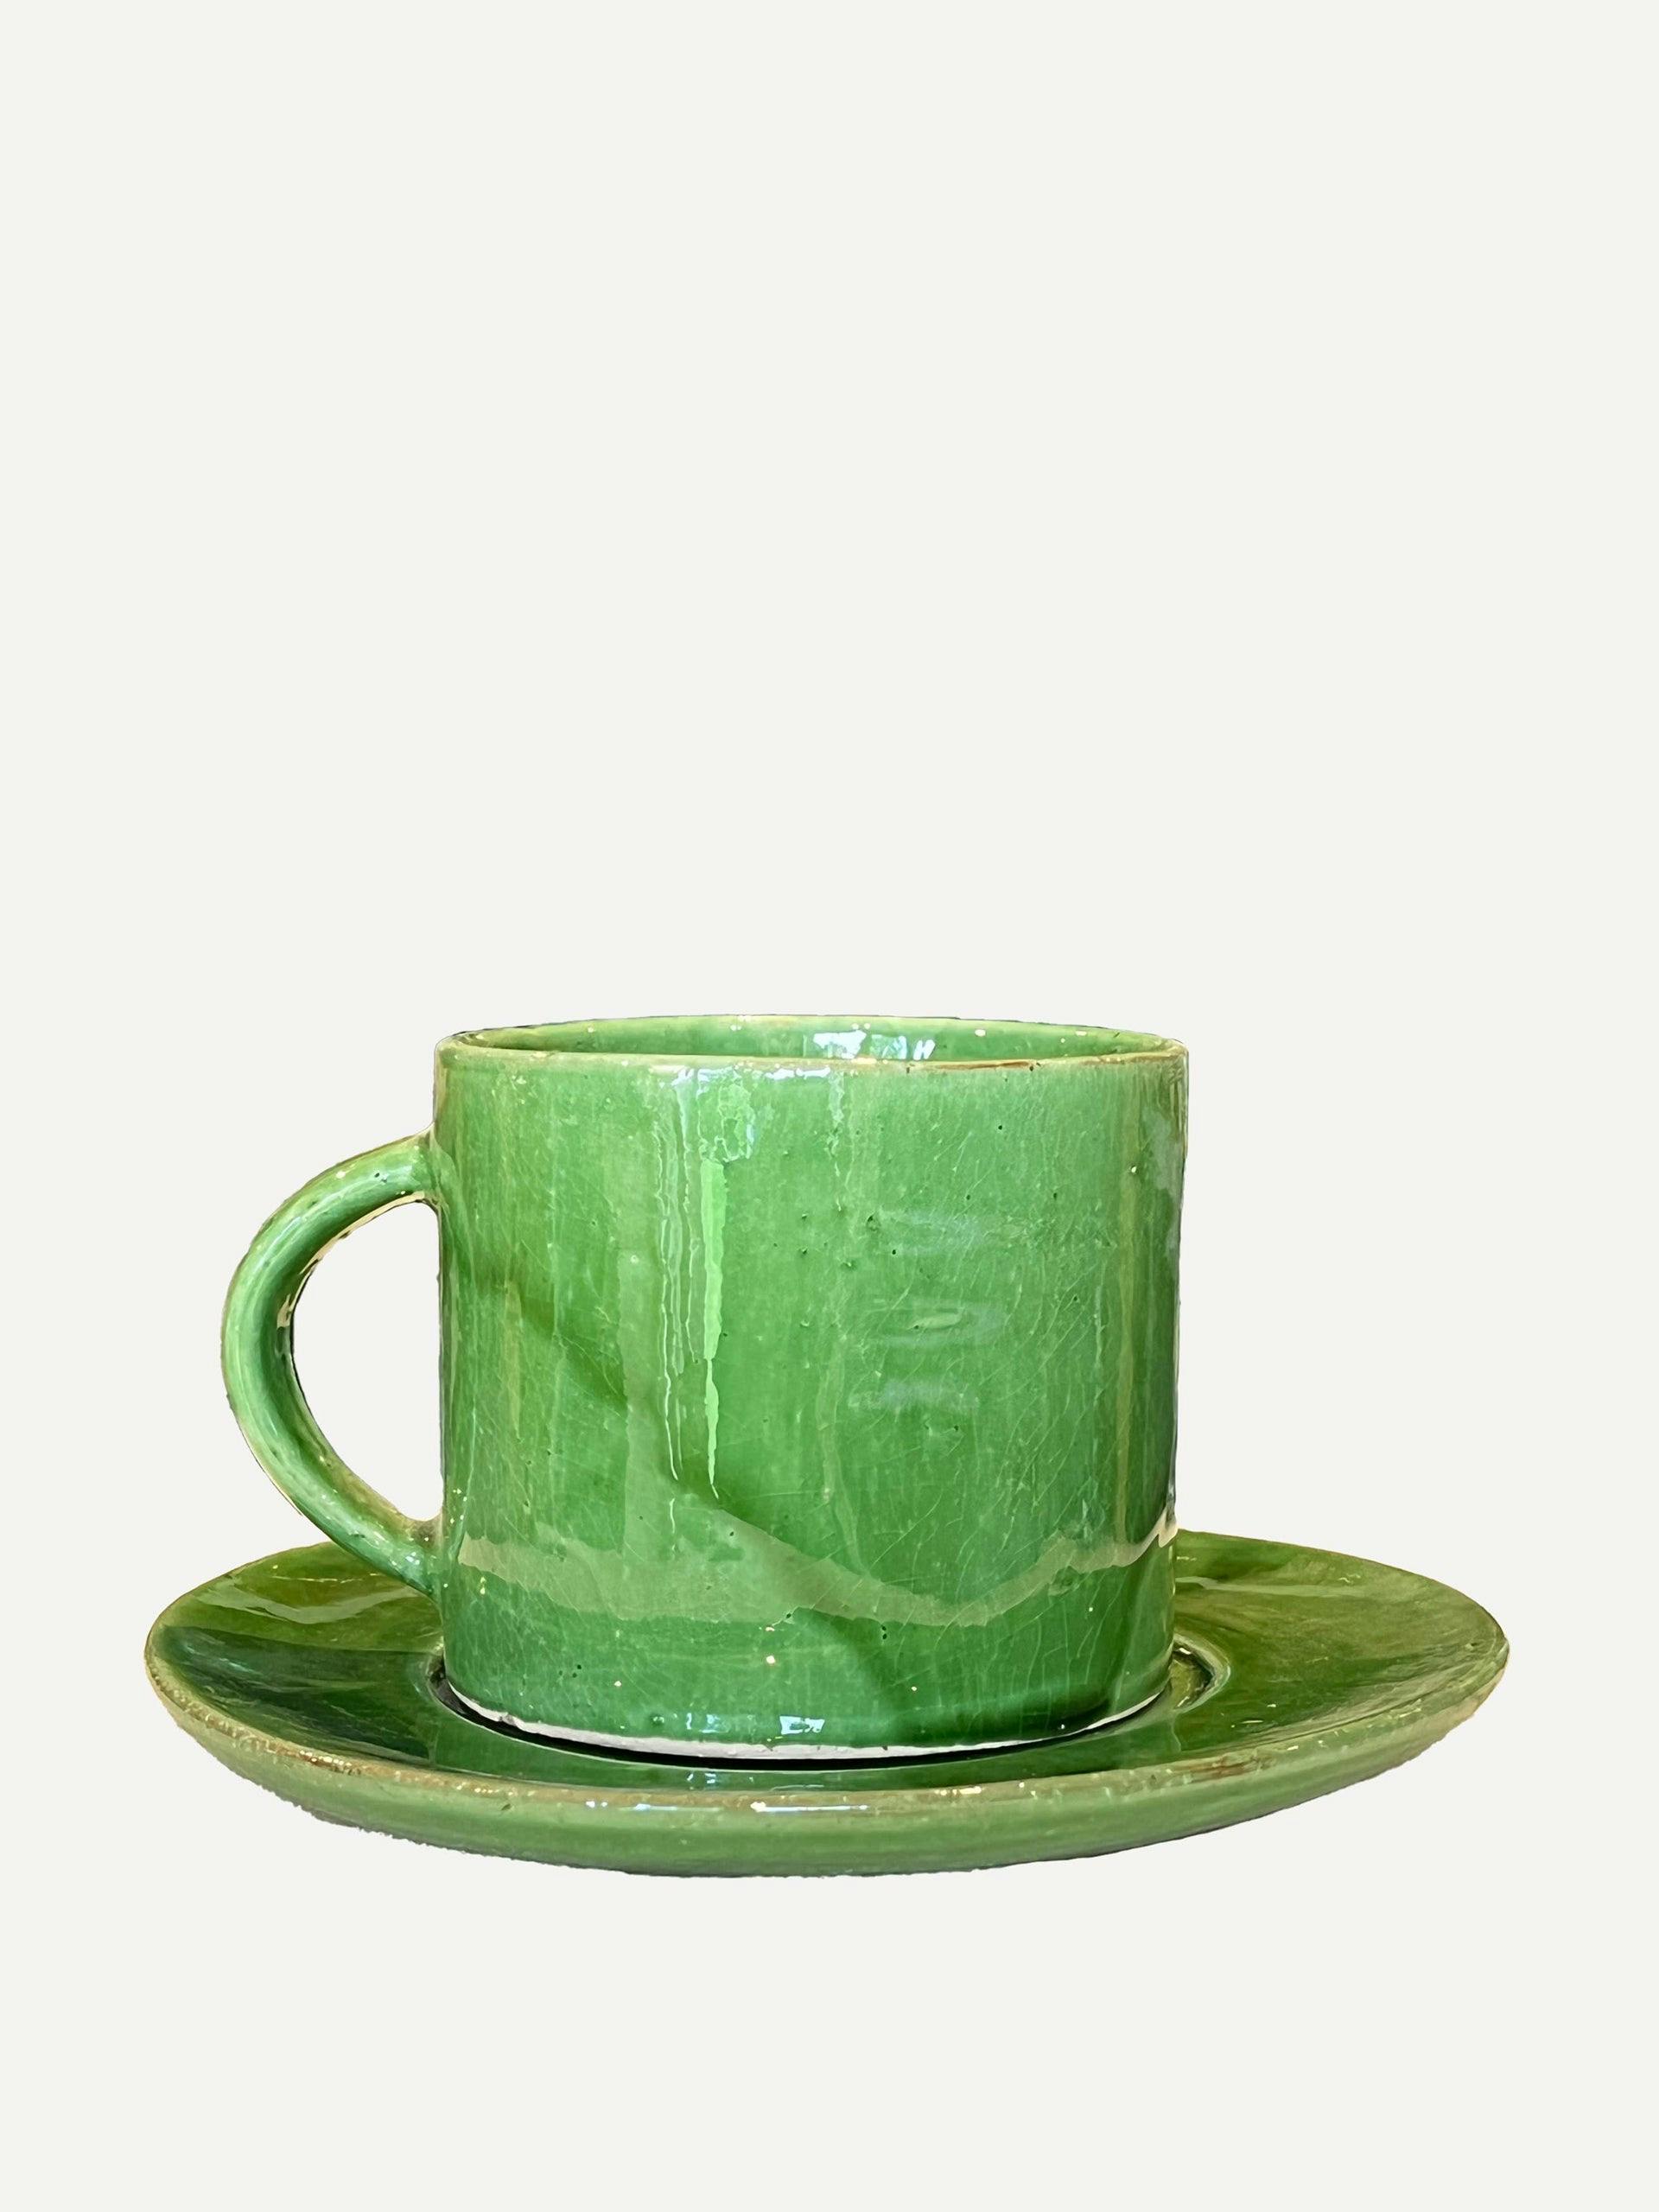 Large green cup and saucer